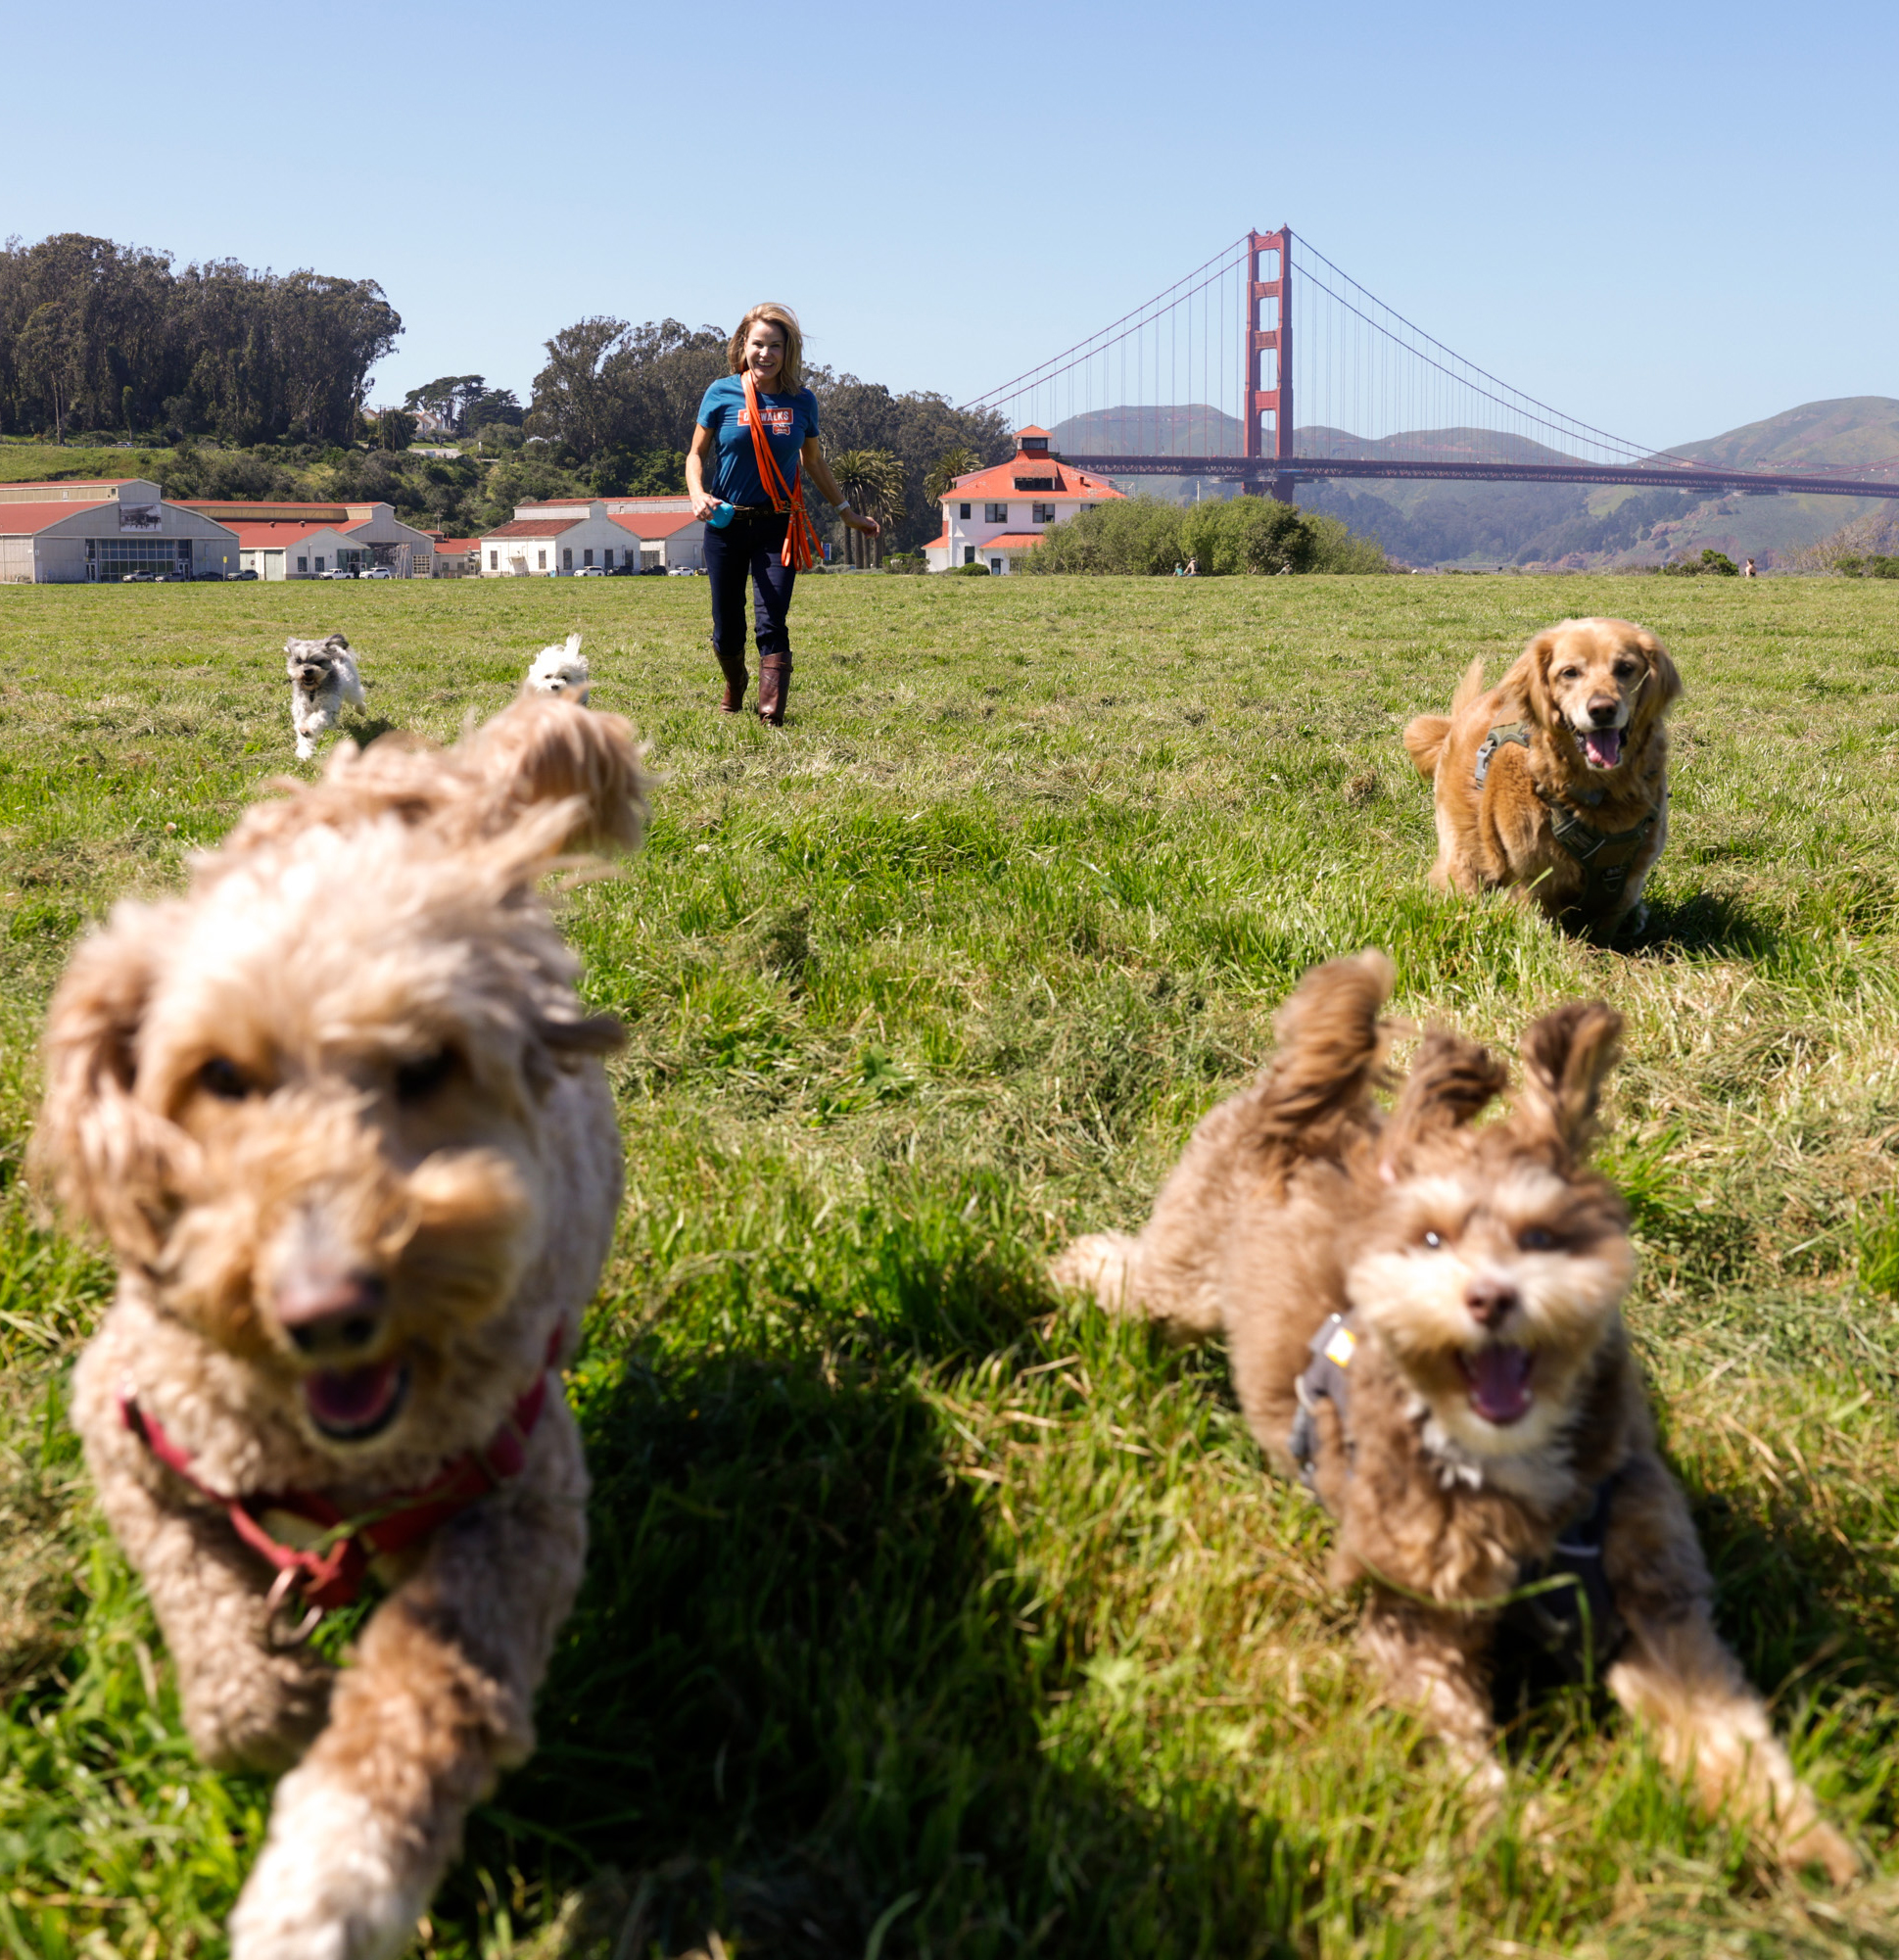 A person walks several dogs in a grassy field with the Golden Gate Bridge in the background.